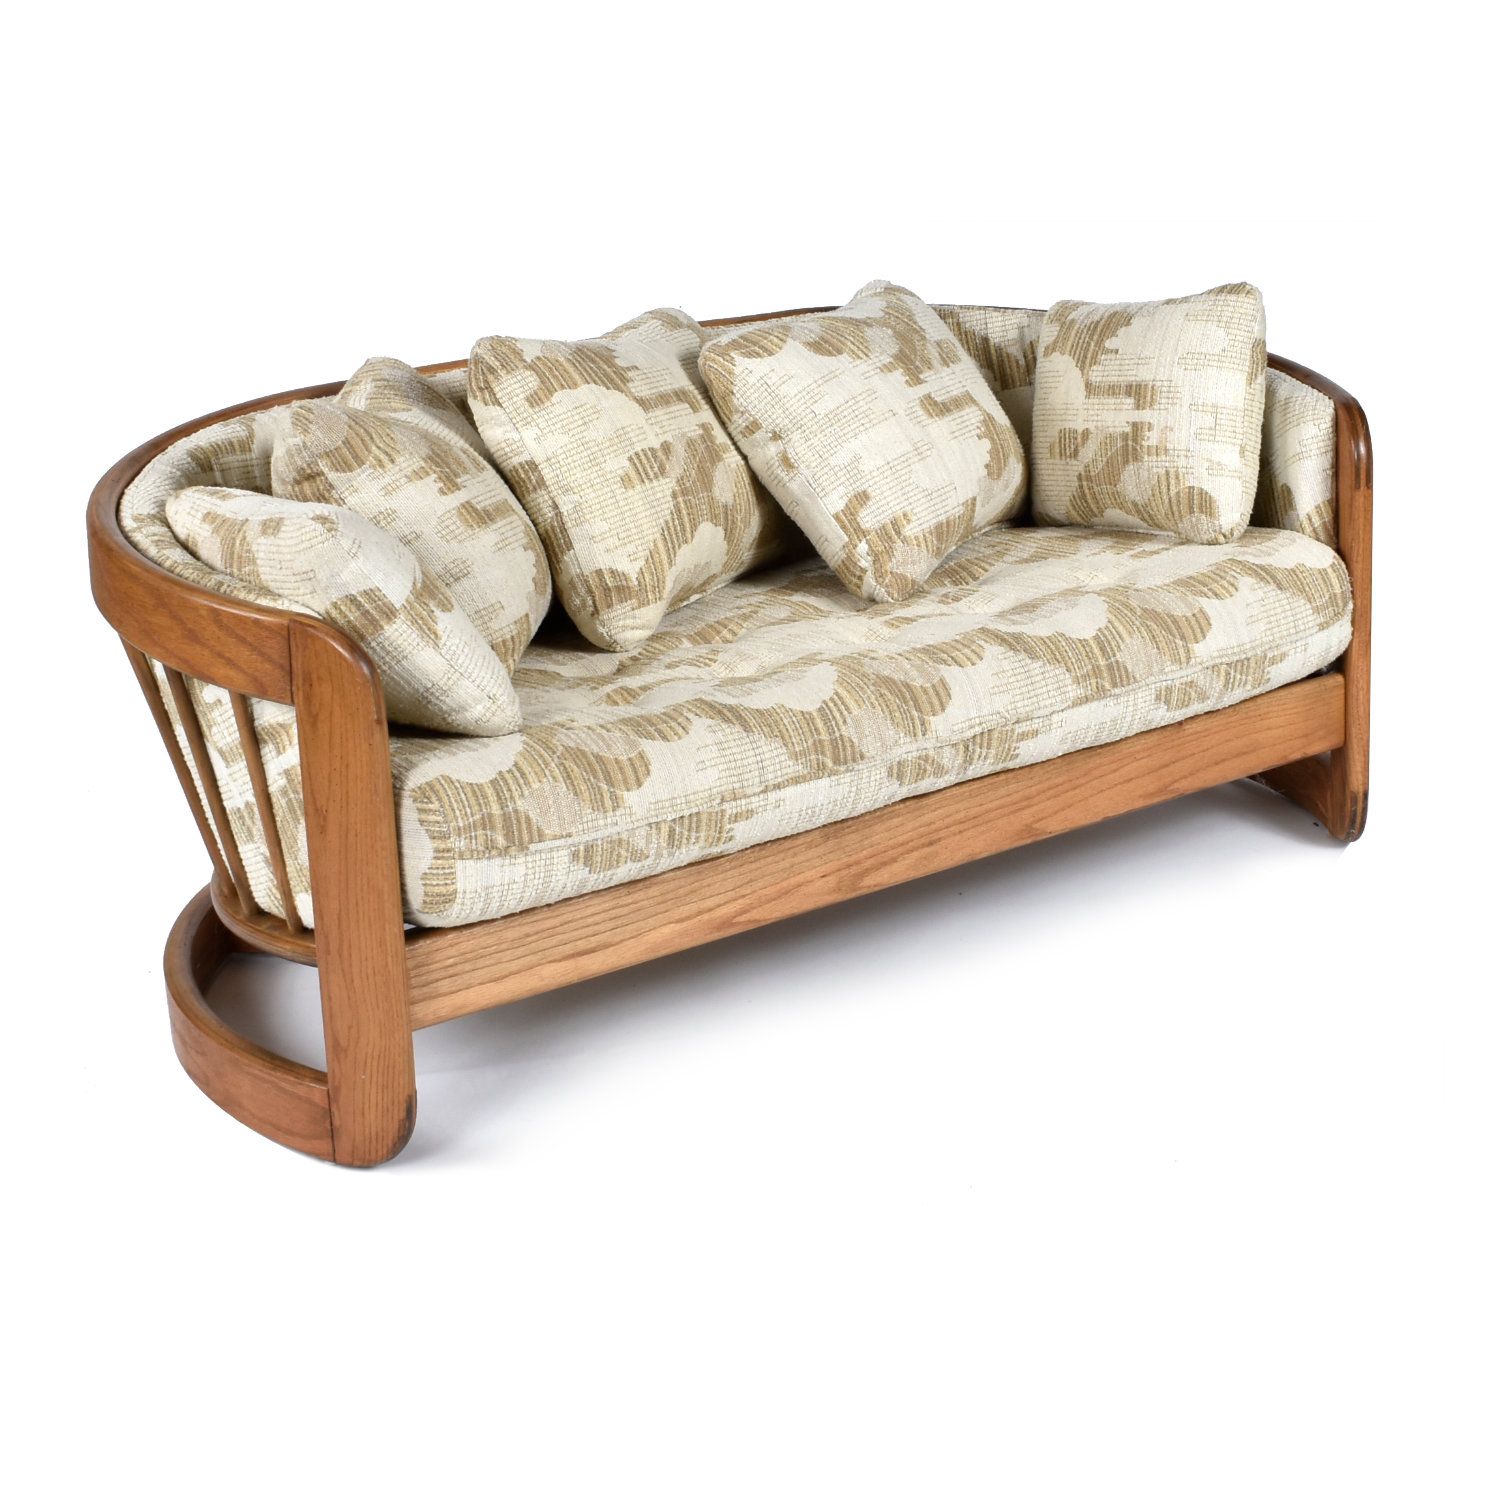 Beige Spindle Back Curved Solid Oak Wood Crescent Shaped Loveseat Within Couches Love Seats With Wood Frame (View 5 of 20)